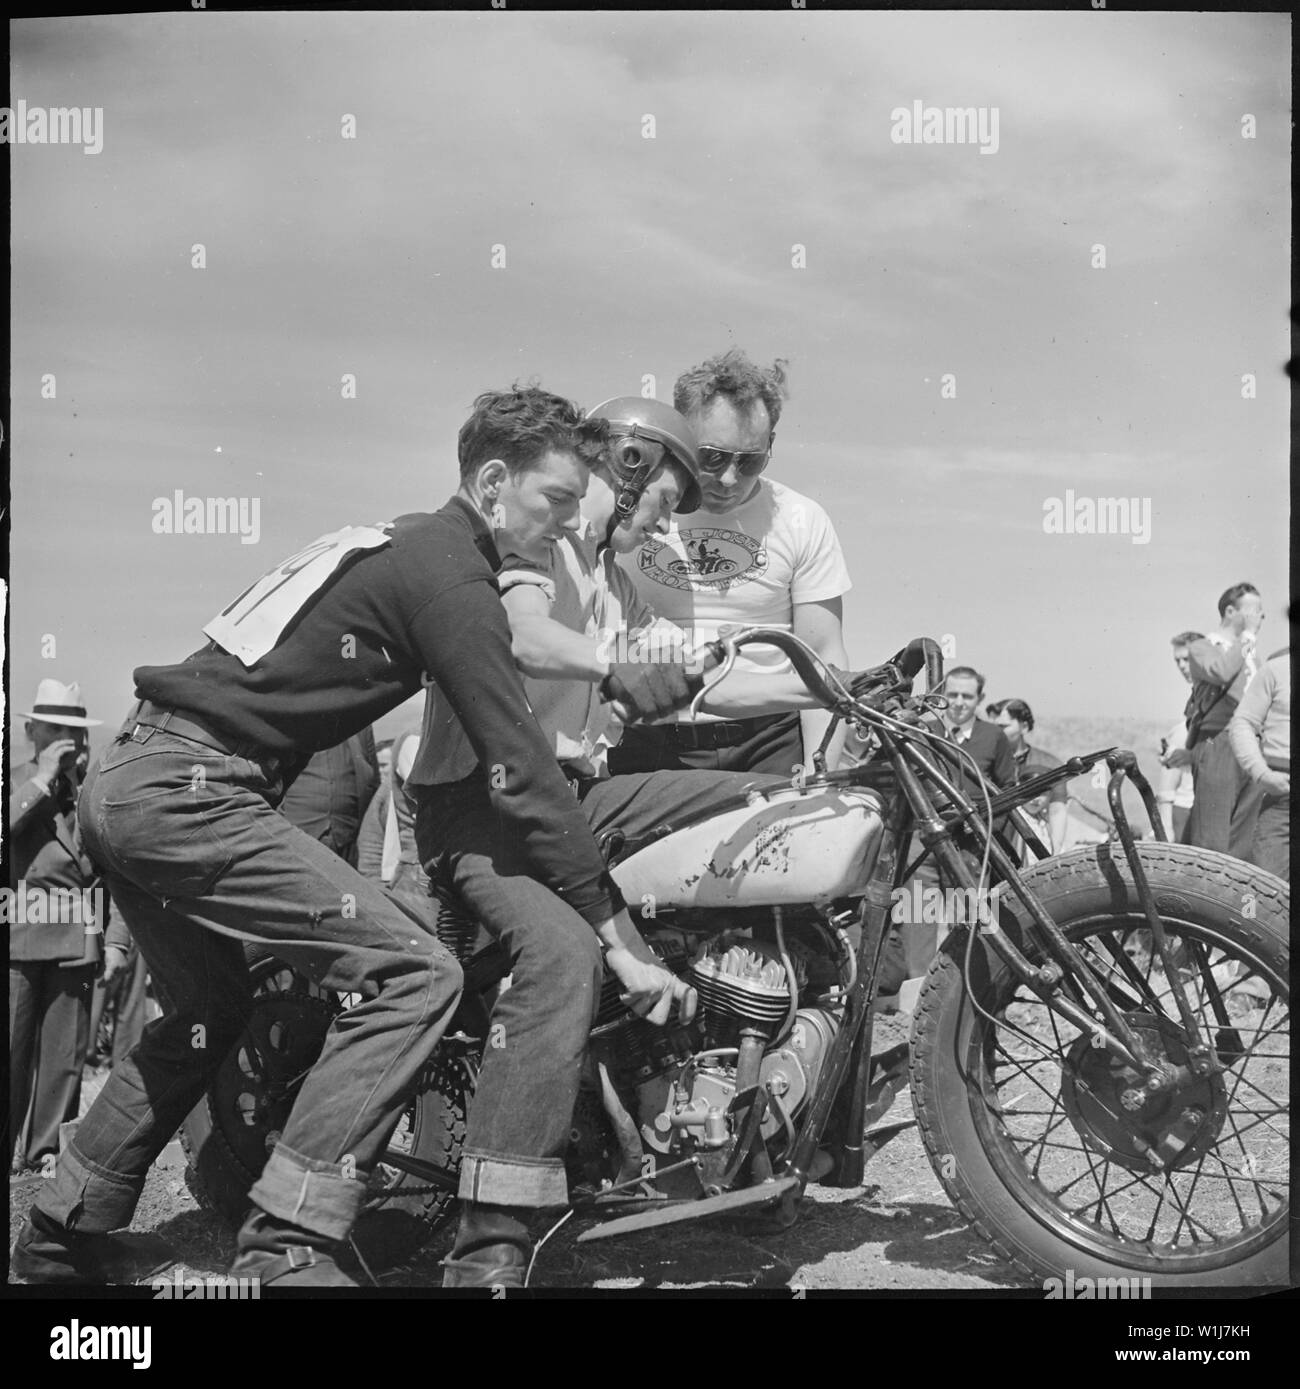 Santa Clara County, California. Motorcycle and Hill Climb Recreation. His first hill climb. The fellow on the left is fiixing the gear shift for him while the other is explaining how to take the bumps. The man with the goggles is wearing a shirt of a local motorcycle club Stock Photo